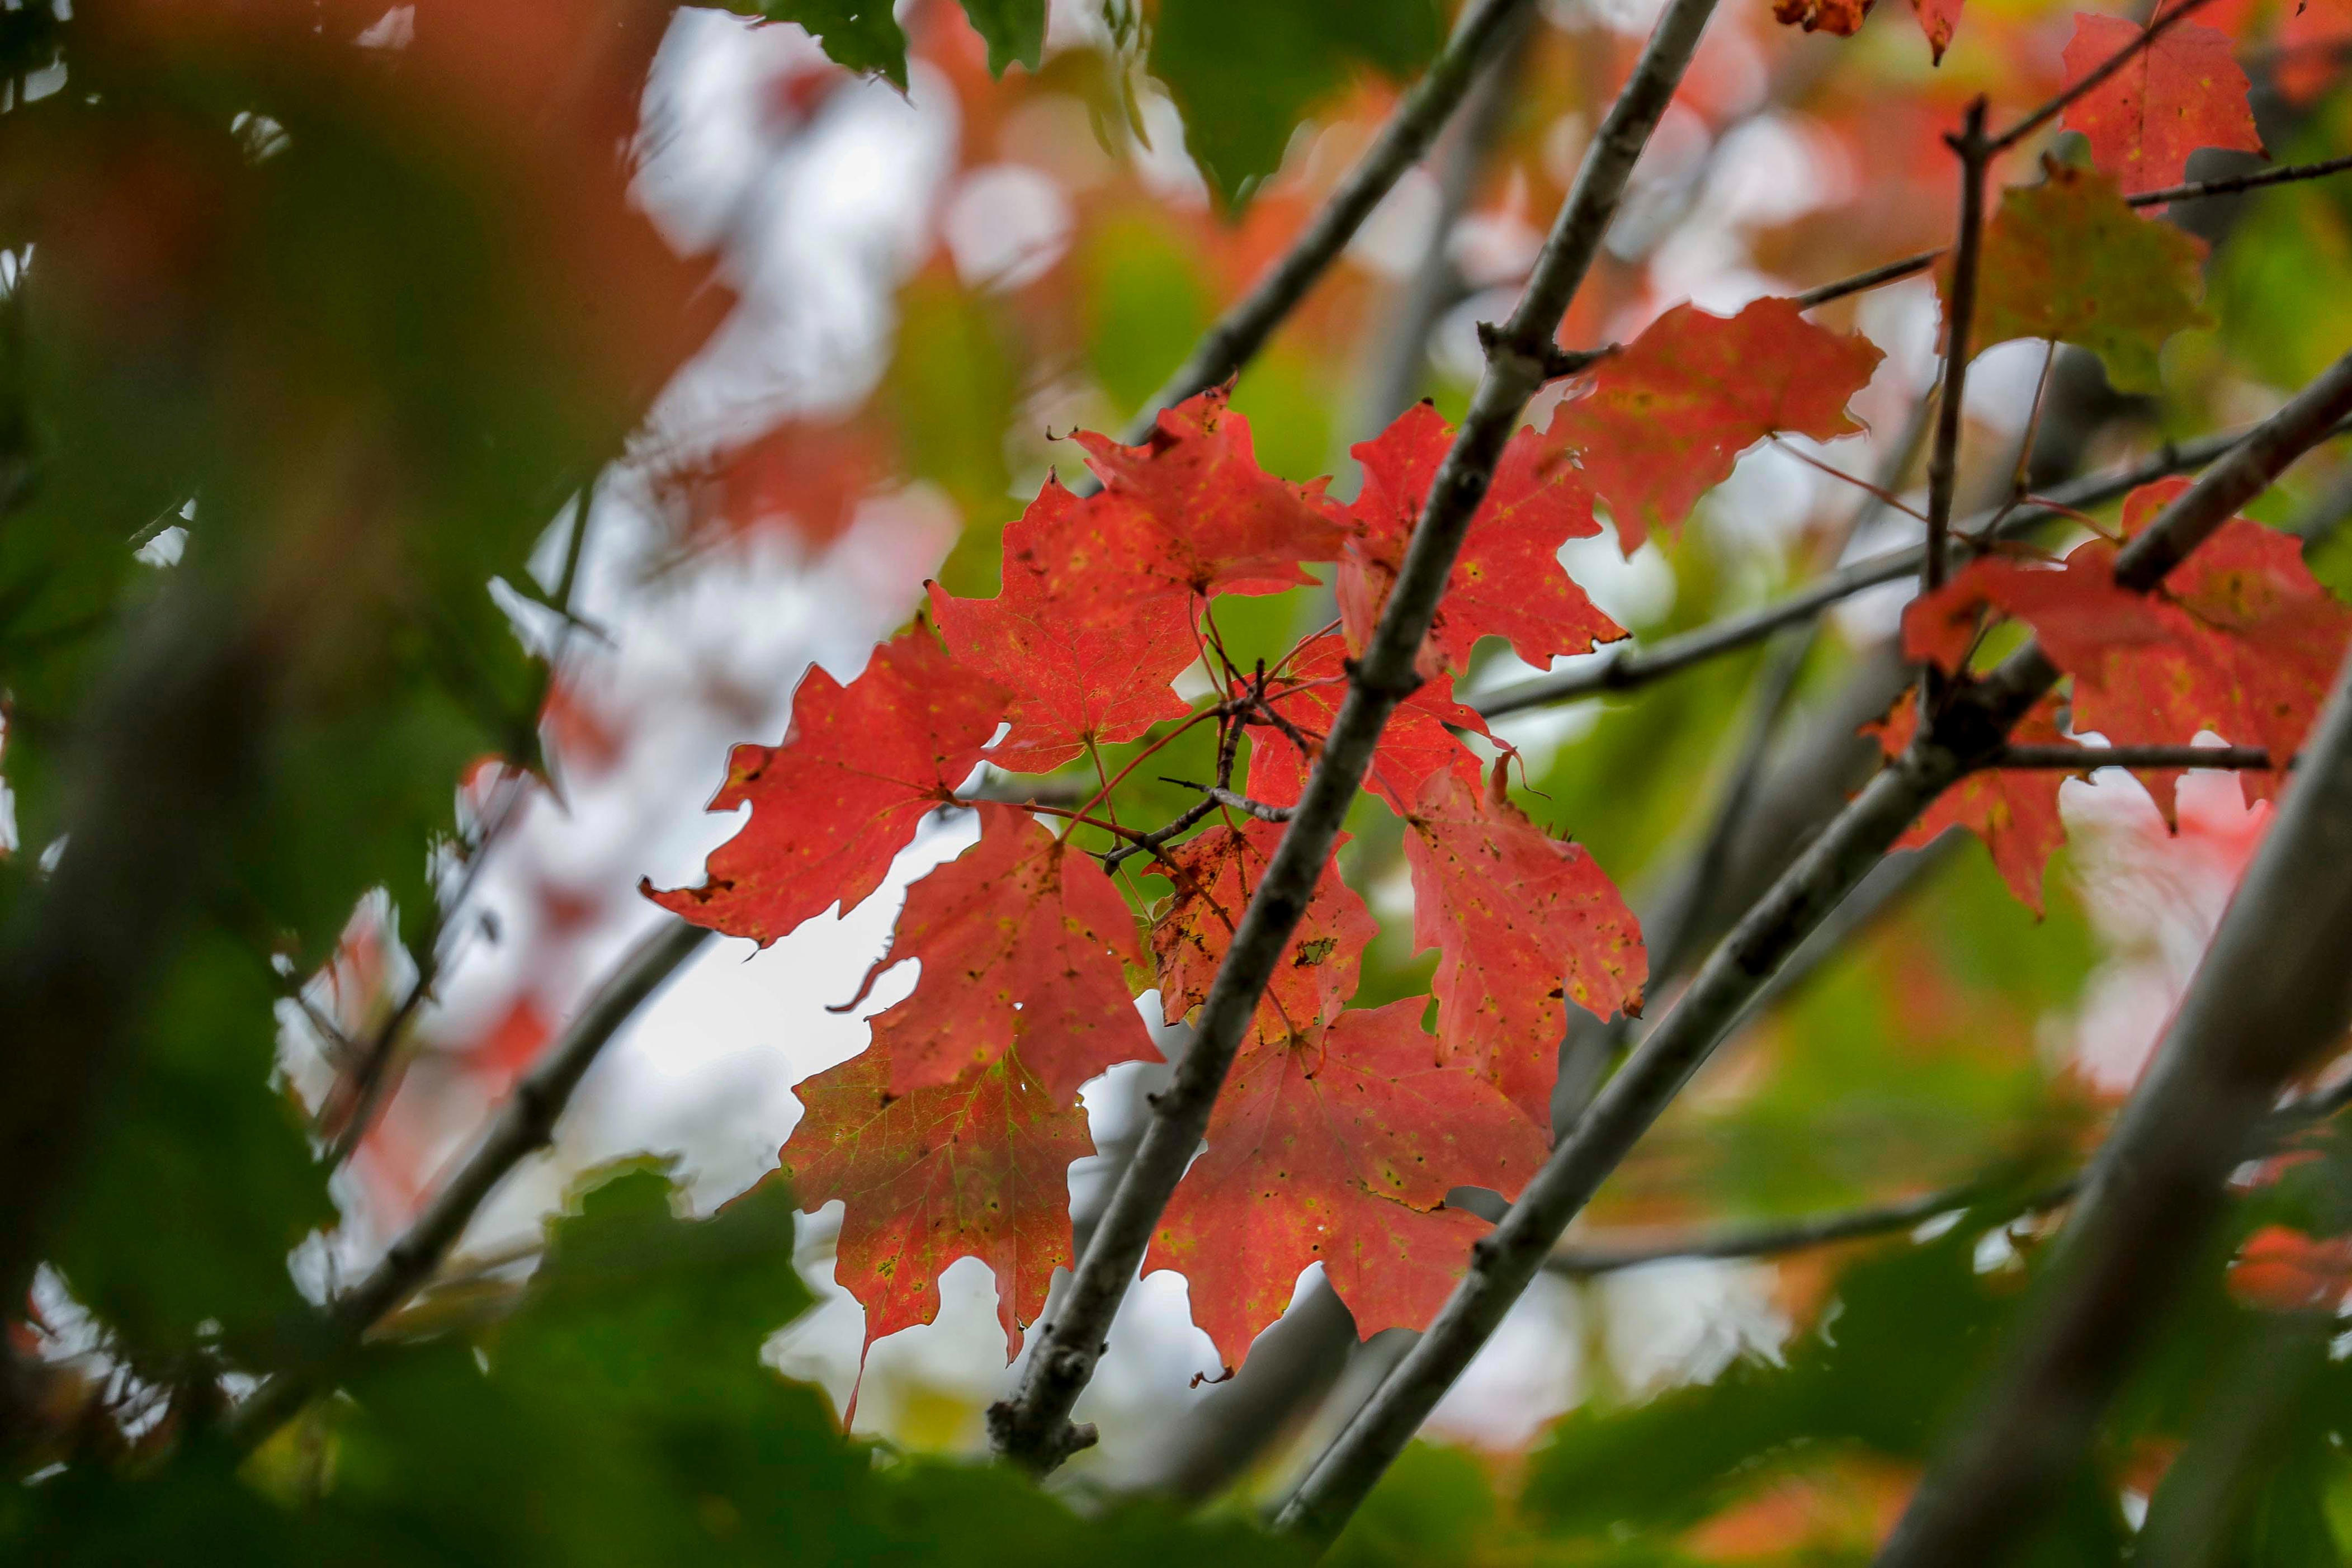 Manitowoc, here's what to know about fall leaf pickup and more news in